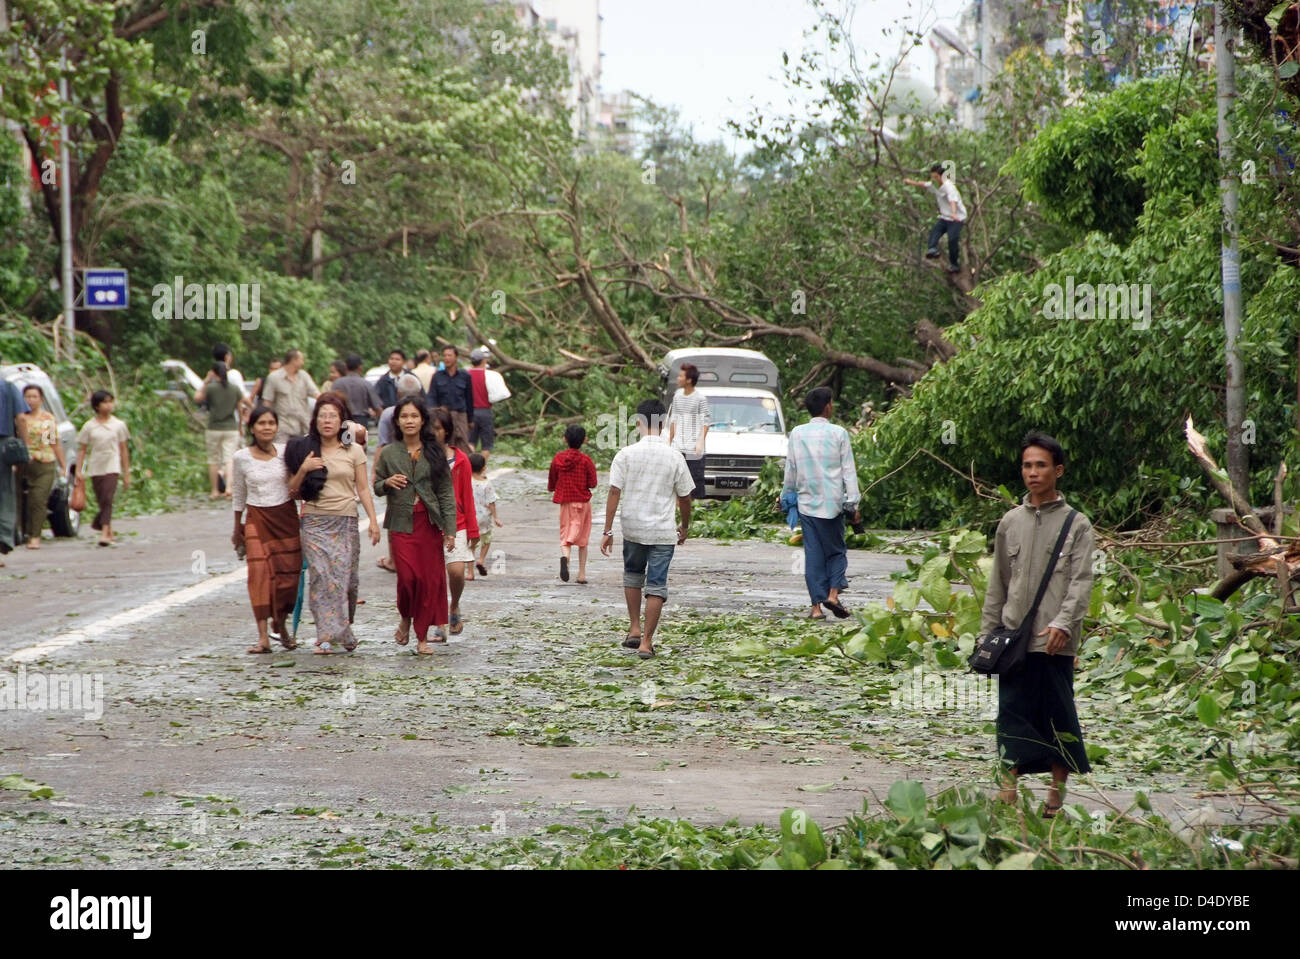 Toppled trees and other debris block a street in Yangon, Myanmar, 5 May 2008. International aid has begun after cyclone 'Nargis' devastated Myanmar, though the exact situation in the country, which is isolated from the outside world by the military junta, remains unclear. Most traffic routes are blocked, Myanmar's government assumes that more than 15,000 people were killed and hund Stock Photo